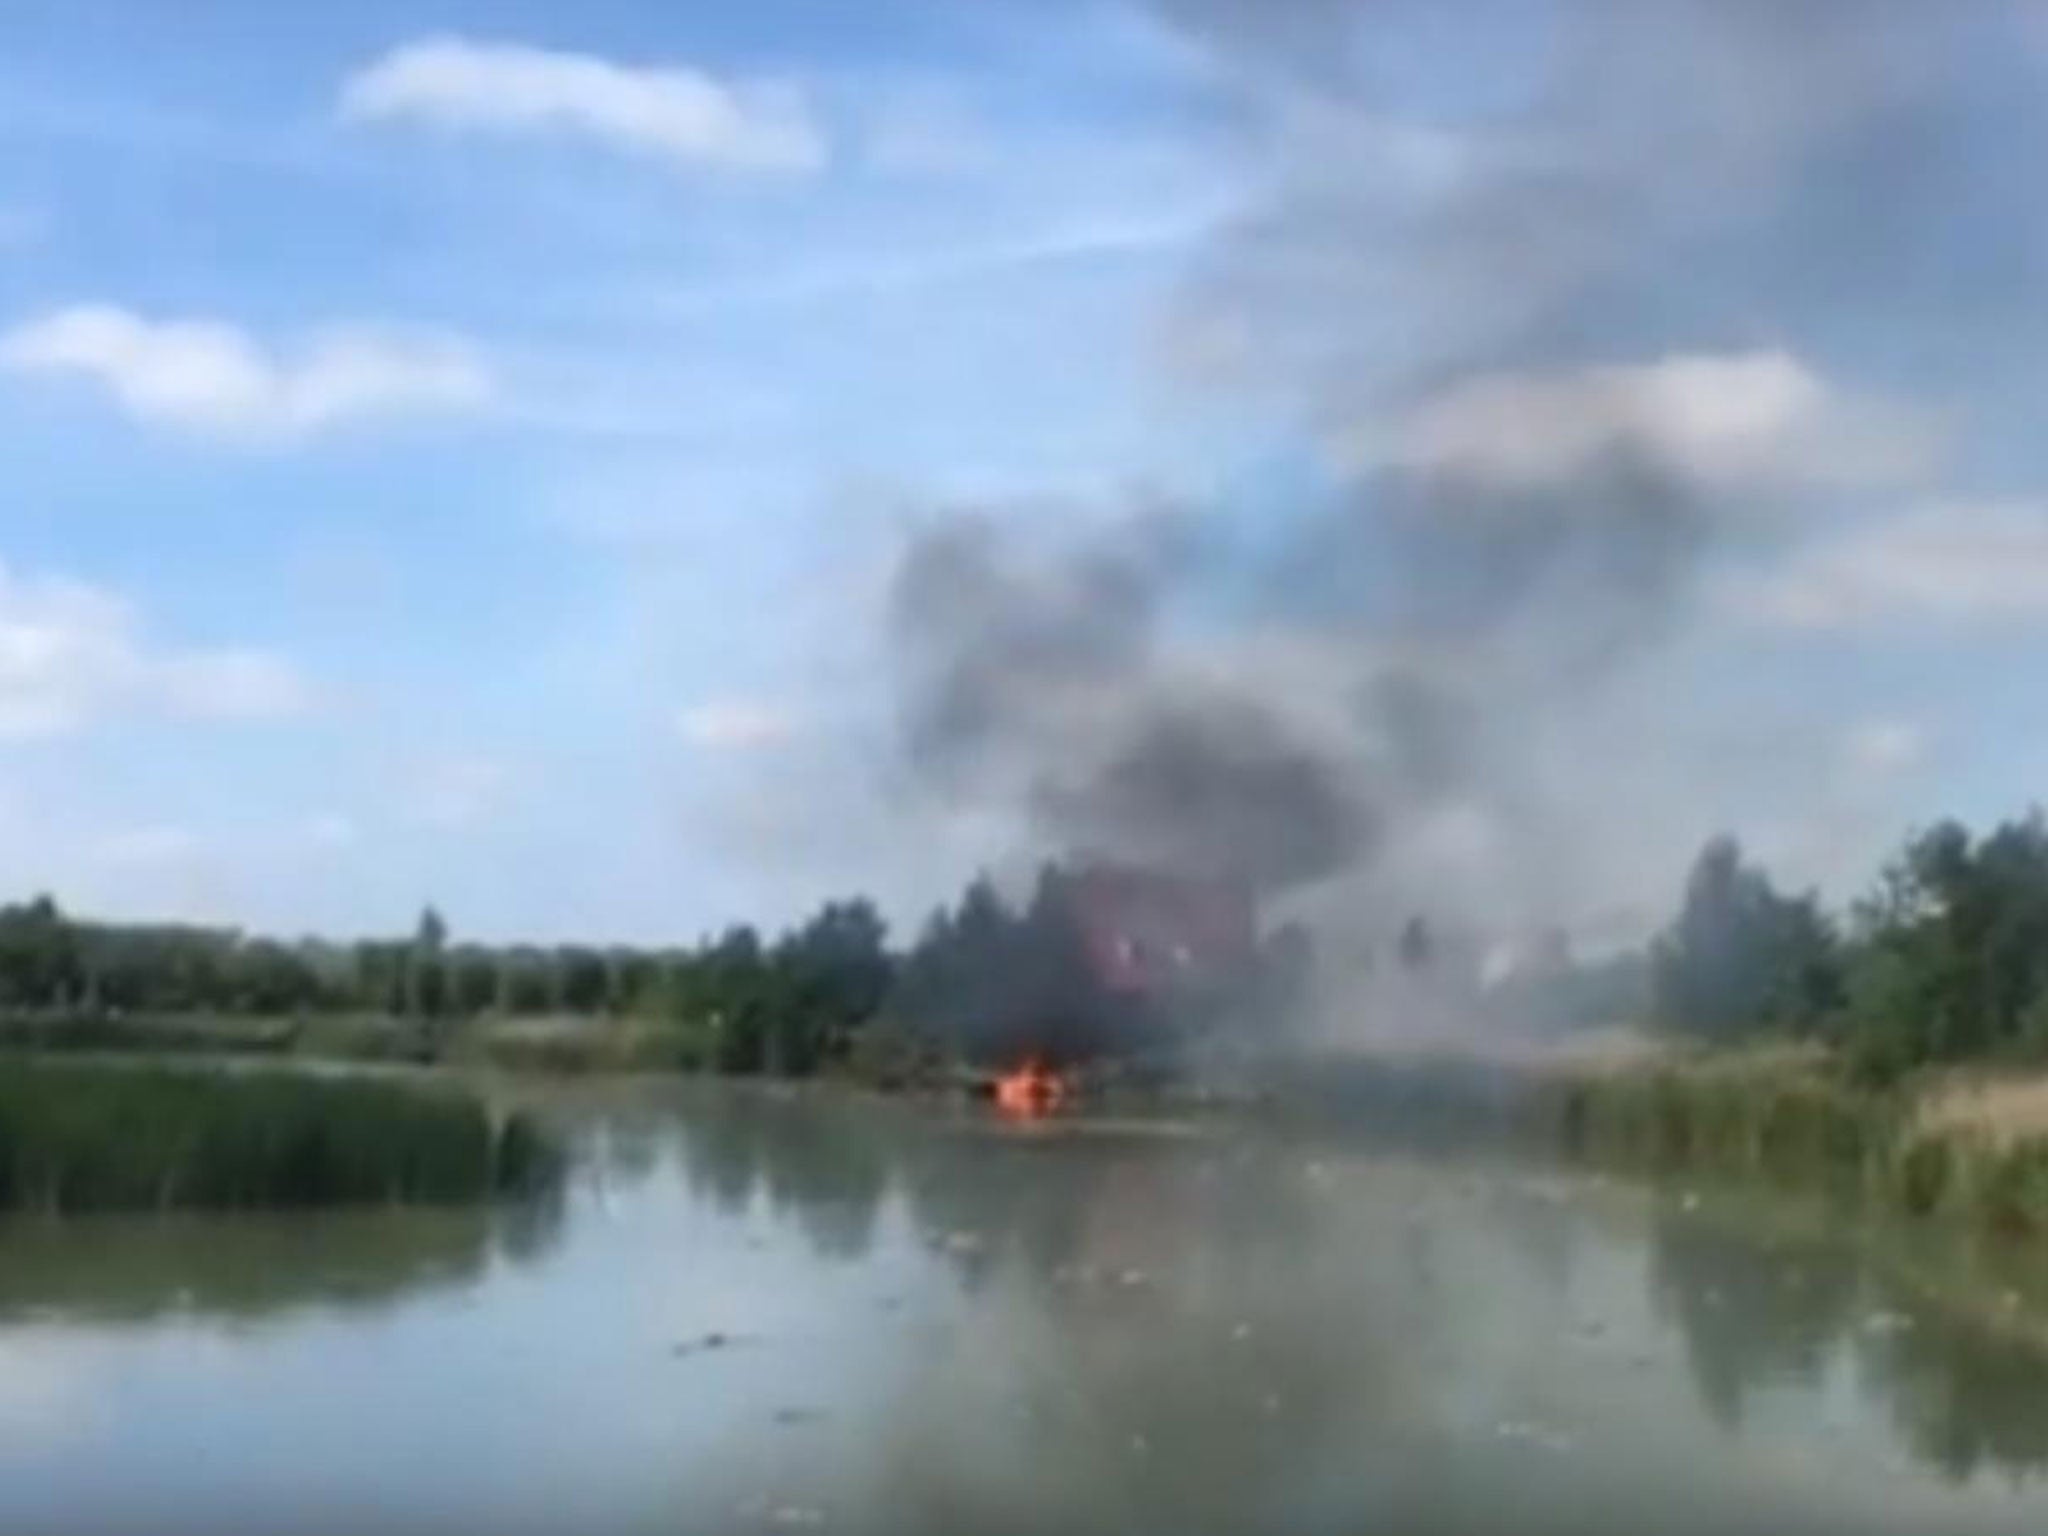 The F-5 fighter jet crashed during a display at an air show in Leeuwarden, the Netherlands, on 9 June